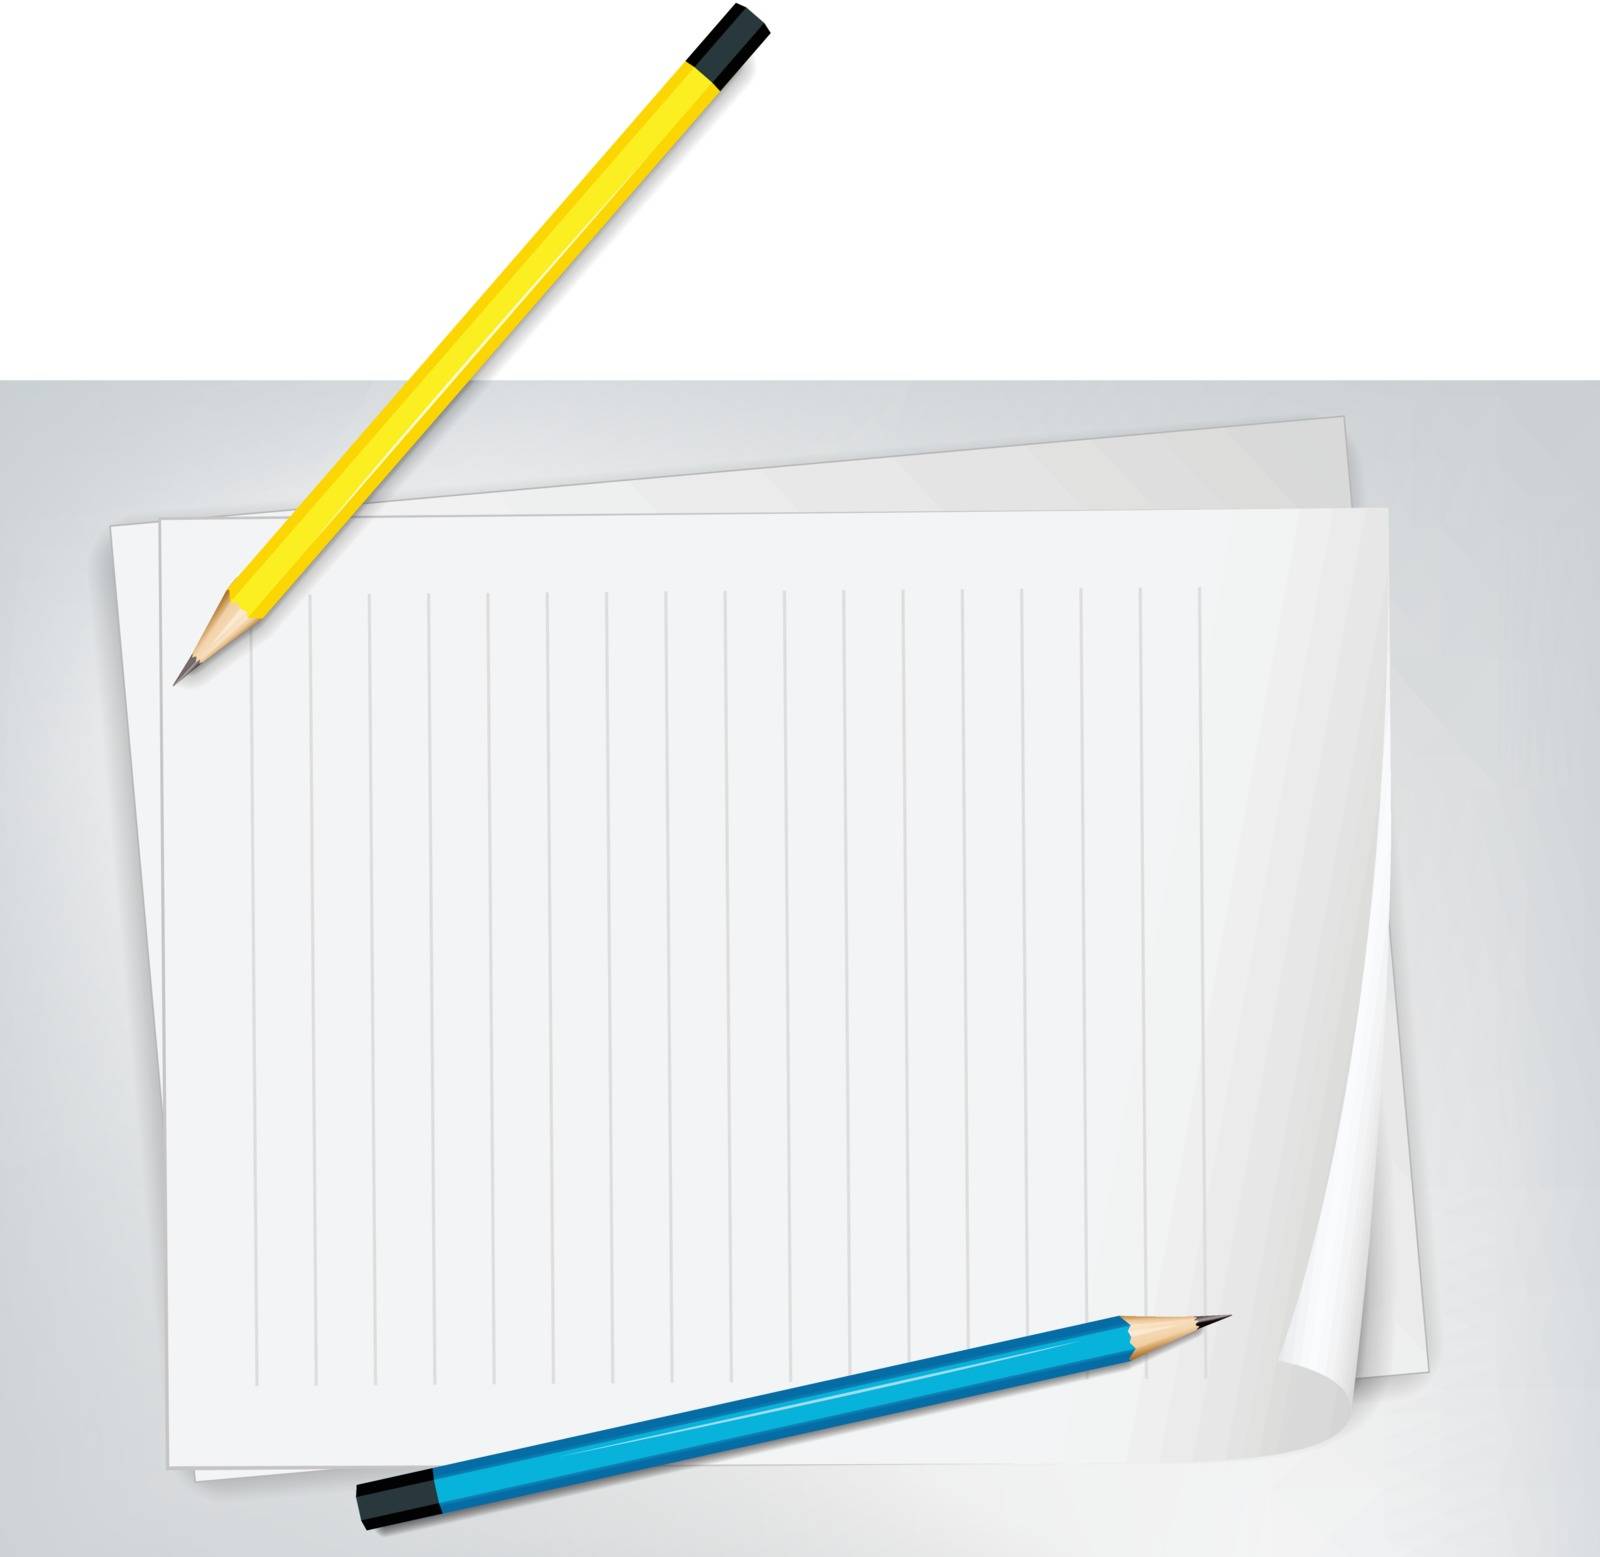 Plain paper and pencils by iimages